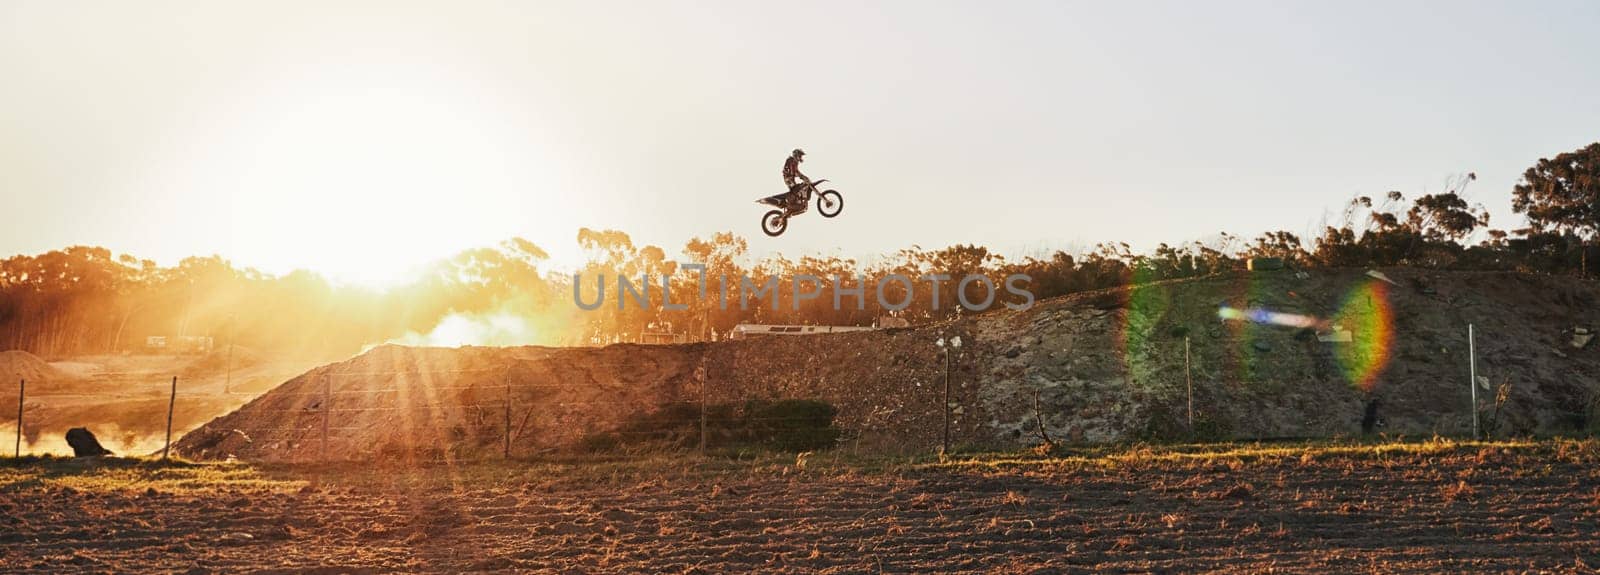 Going over every jump as if its the last. a motocross rider going over a jump during a race. by YuriArcurs